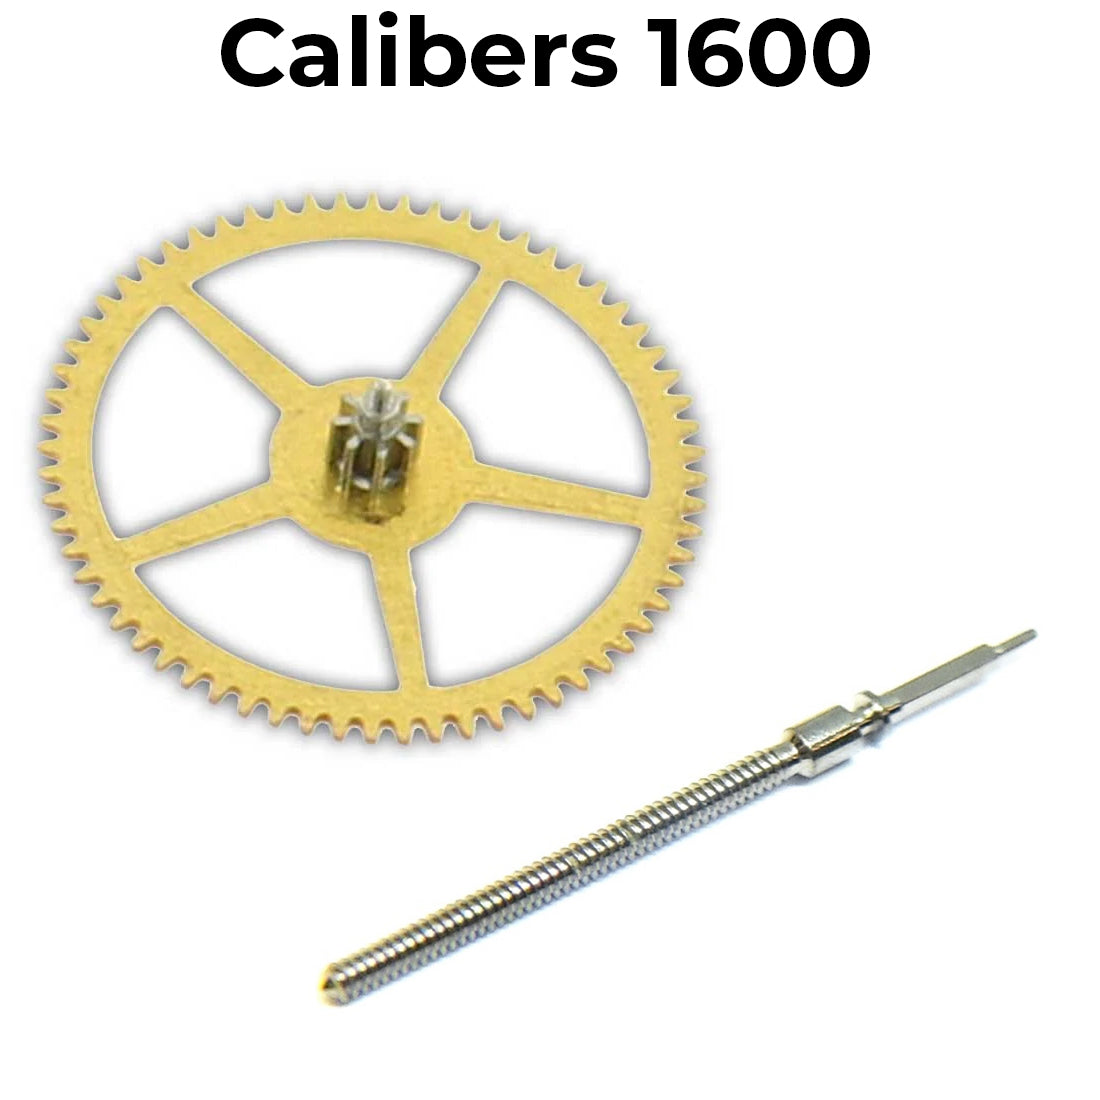 Internal Parts to fit Rolex 16 Series Calibers 1600